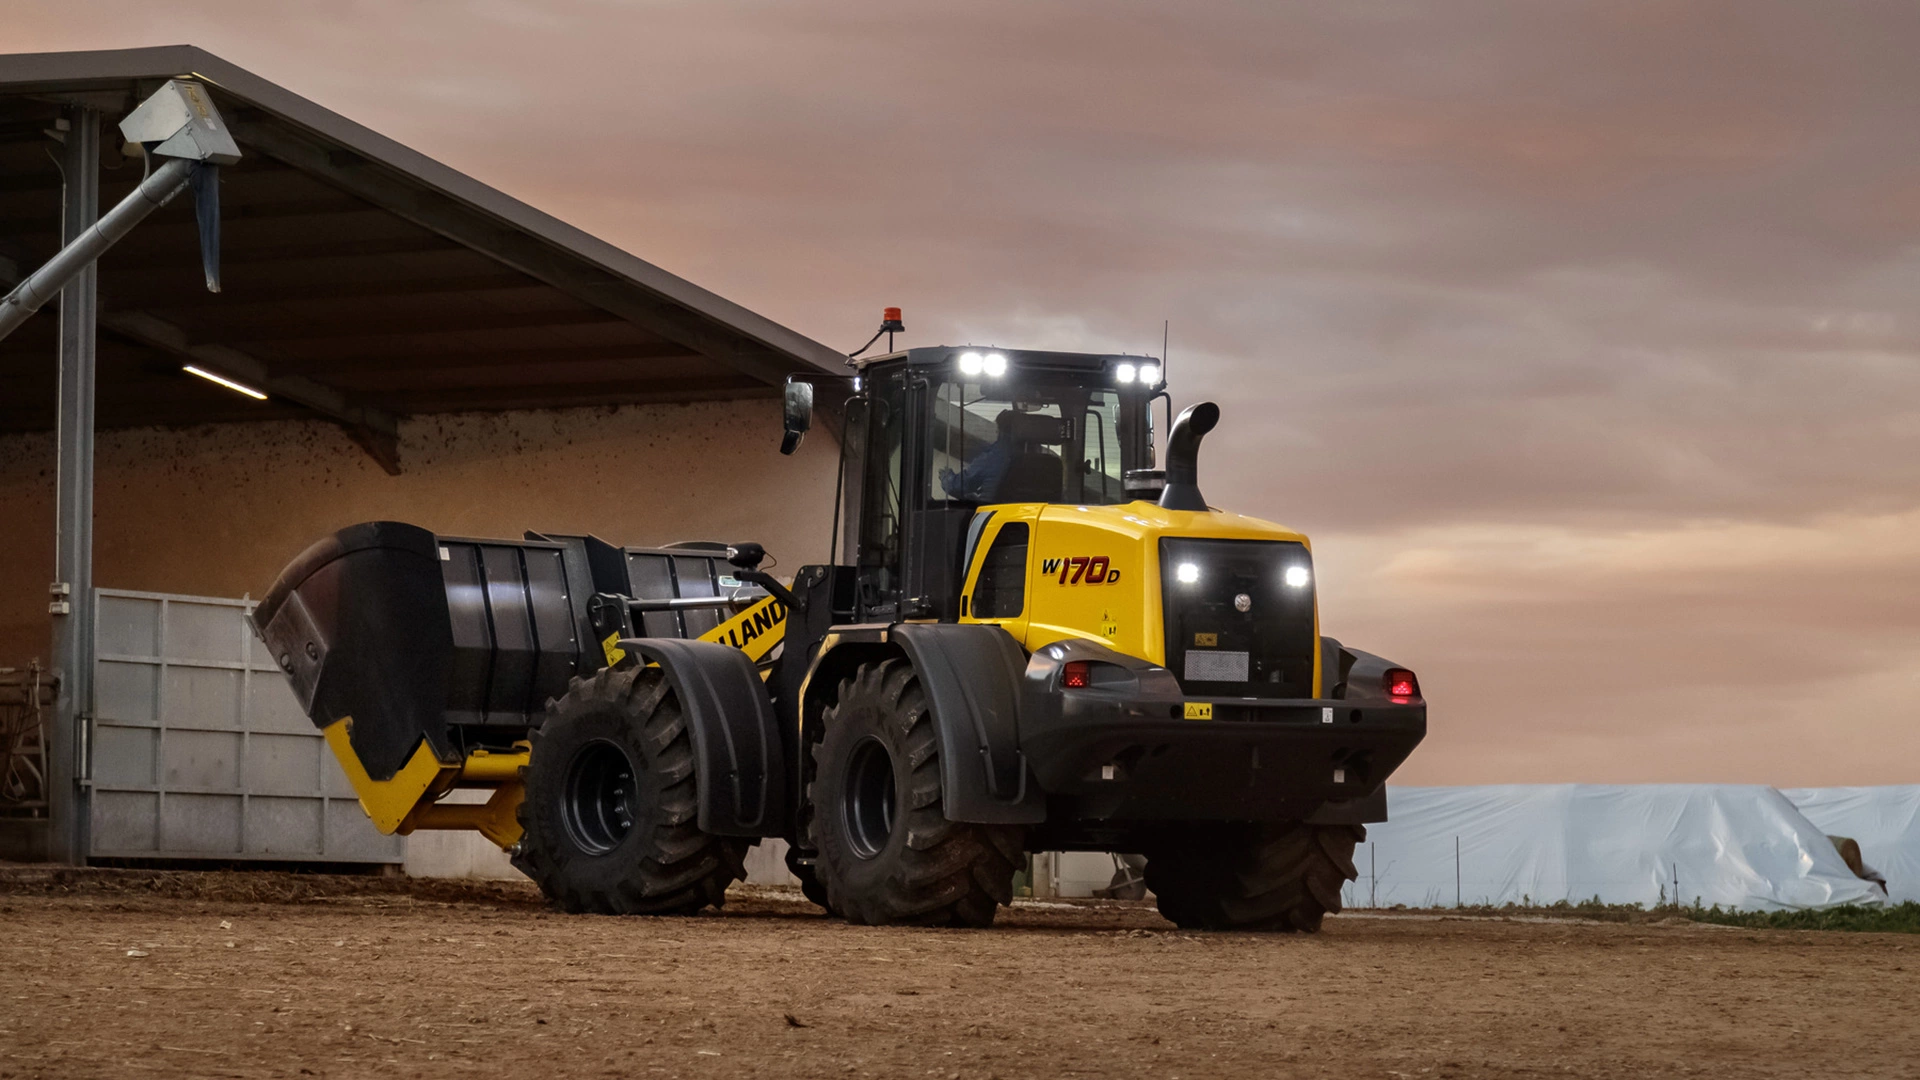 New Holland wheel loader with bucket attachment, ready for nighttime operations in farm setting.